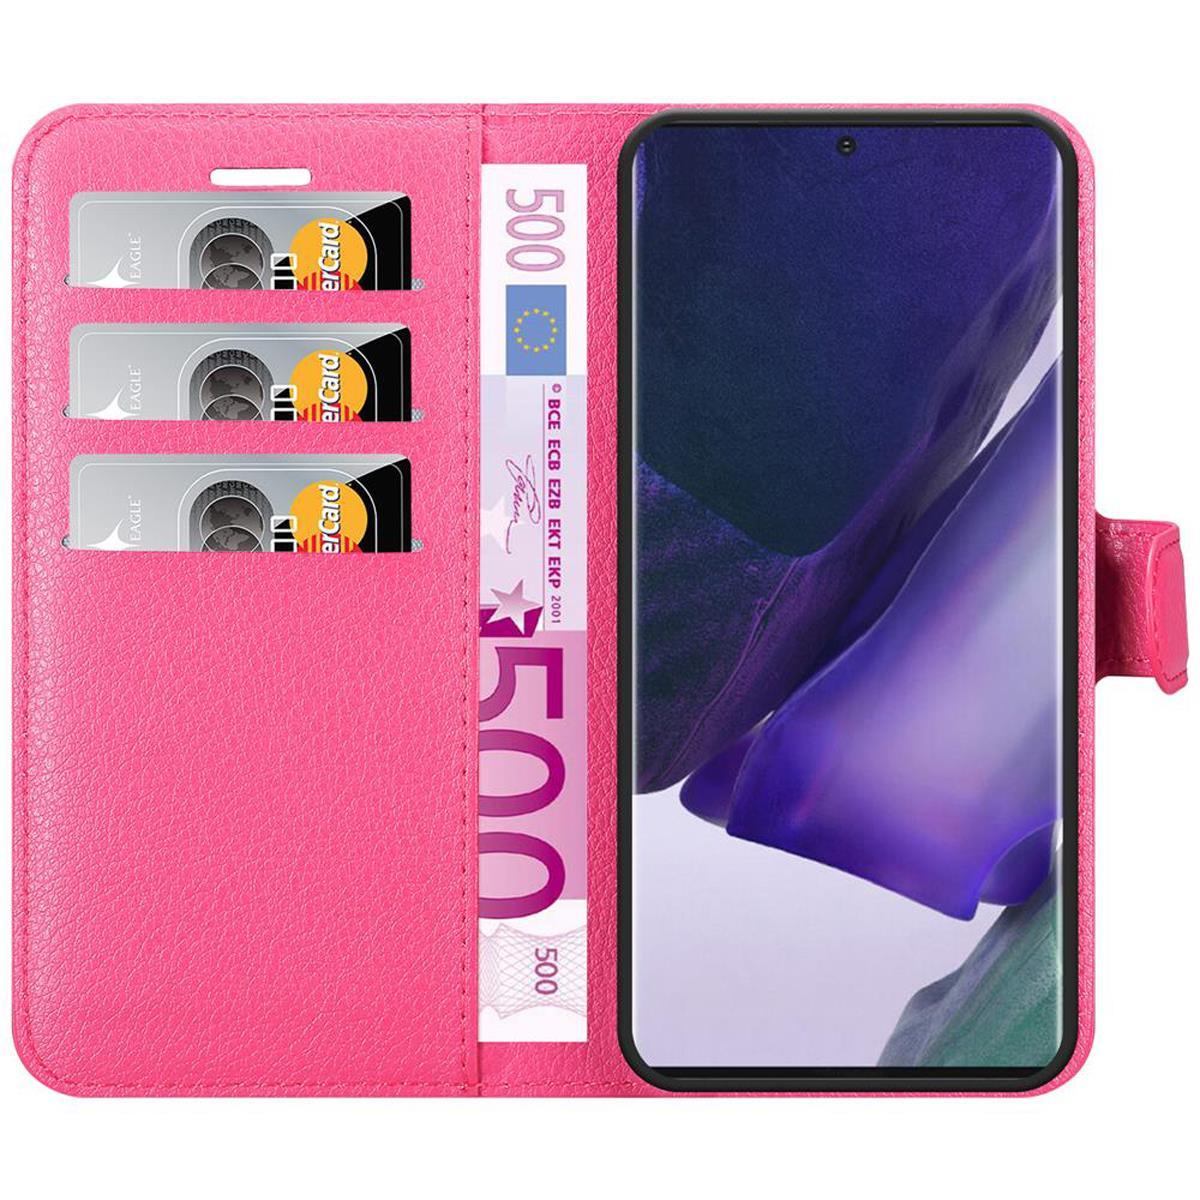 Bookcover, NOTE Hülle PINK 20 PLUS, Book Samsung, Galaxy CADORABO Standfunktion, CHERRY